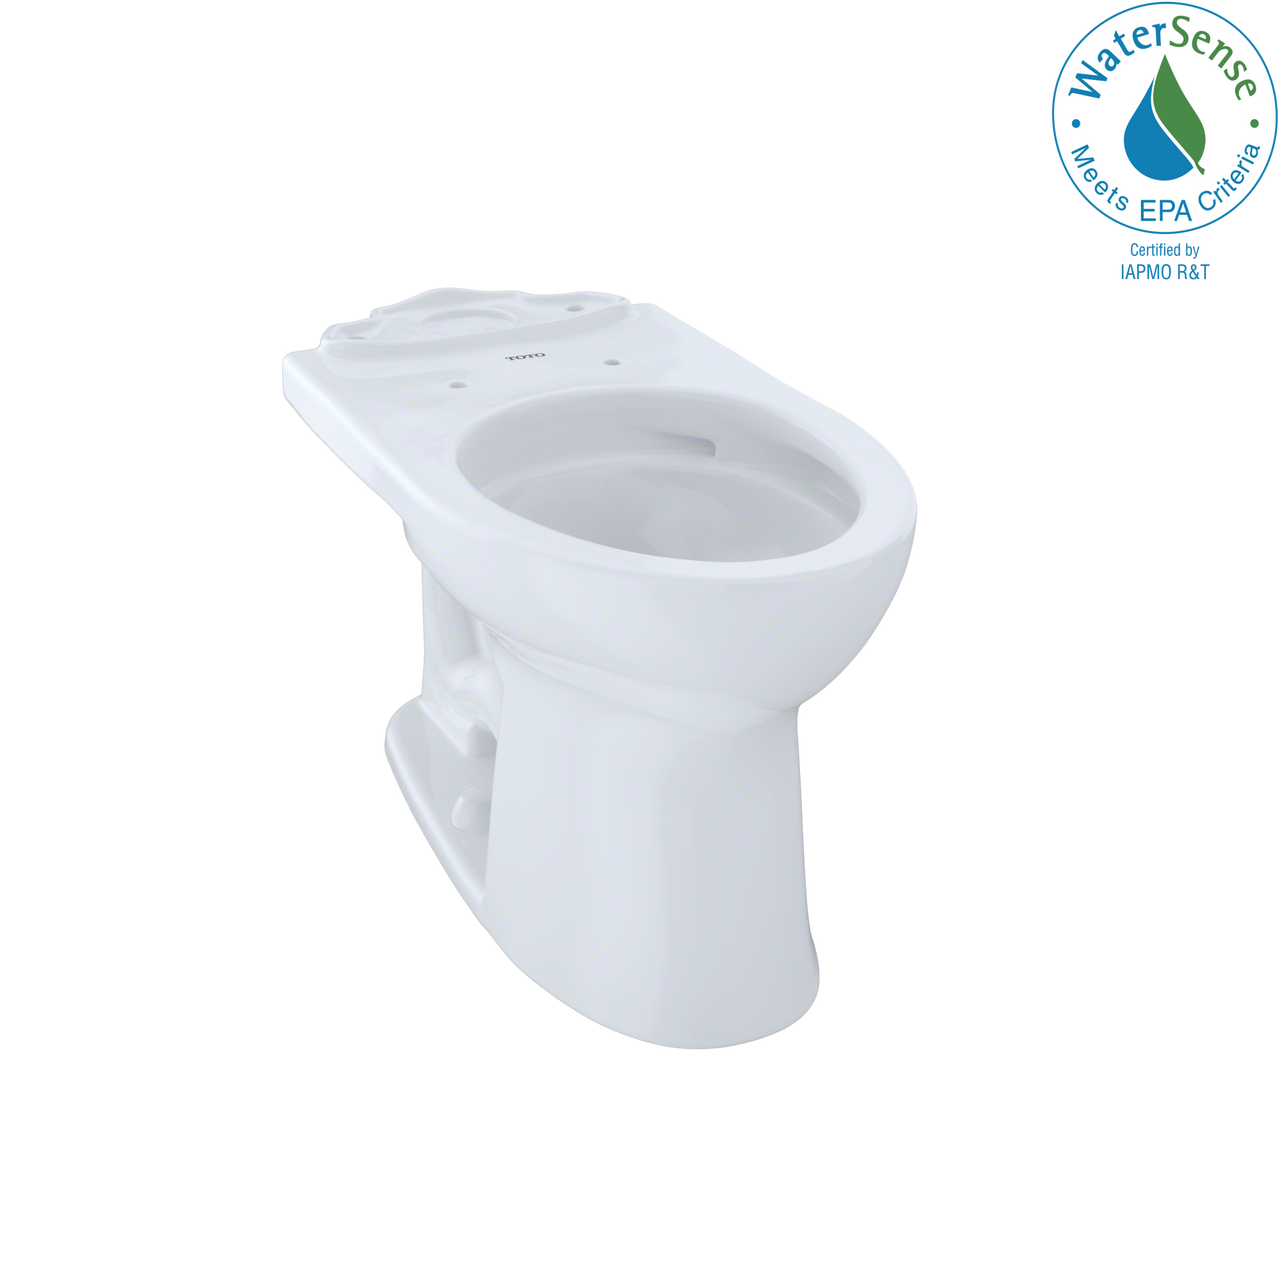 TOTO Drake II Universal Height Elongated Toilet Bowl with CeFiONtect,  - C454CUFG#01 - BNGBath